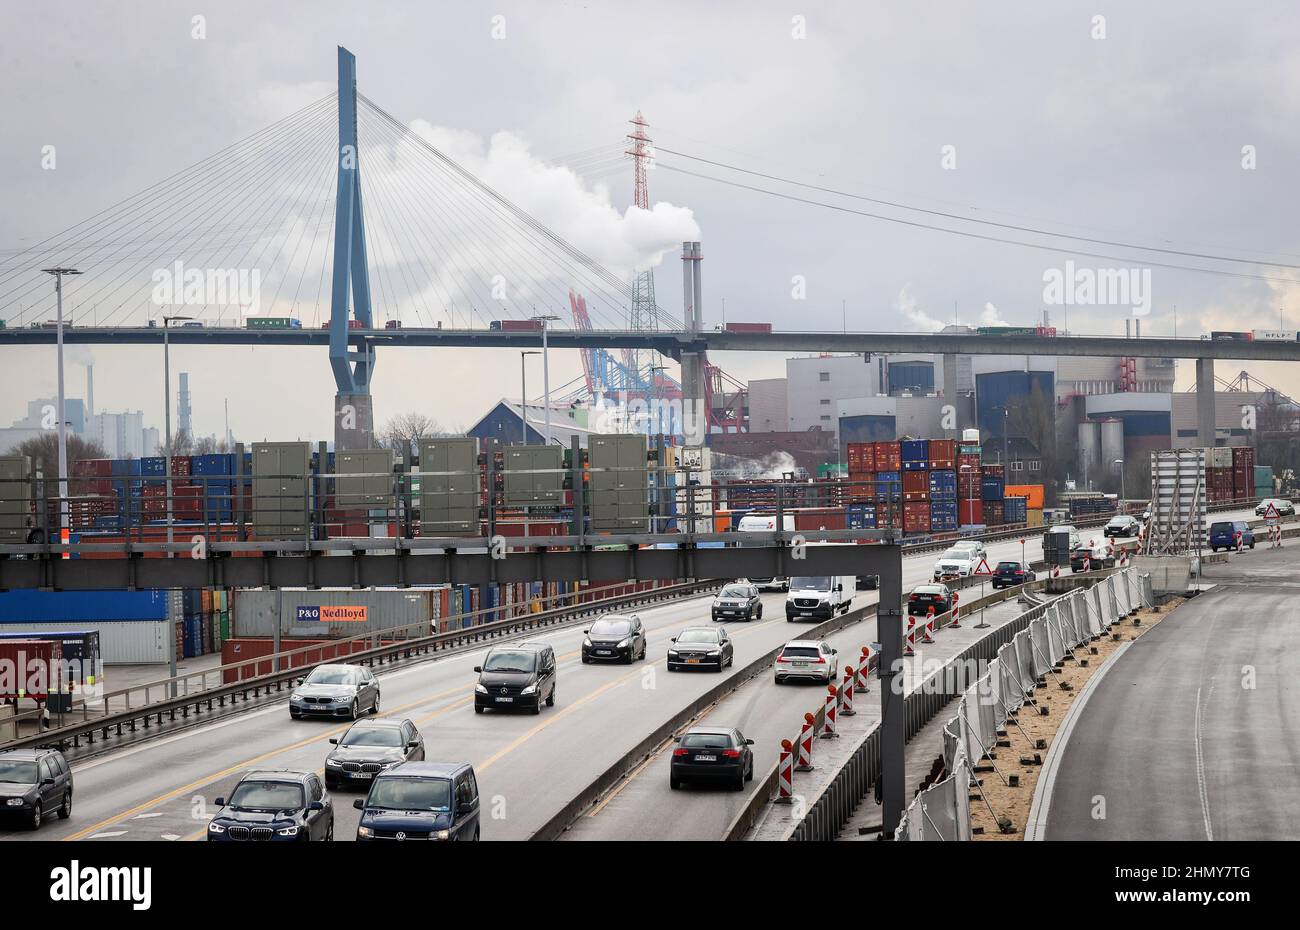 11 February 2022, Hamburg: Traffic flows on different lanes of the A7 freeway south of the Elbe Tunnel. Due to construction work south of the Elbe Tunnel, the A7 will be fully closed from Feb. 18 (10 p.m.) to Feb. 21 (5 a.m.) between the Hamburg-Volkspark and -Heimfeld interchanges. During the weekend, all six lanes are to be transferred to the new K30 West (r) embankment. Construction can then begin on the other half of the ramp, the new link between the Elbe Tunnel and the Elbmarsch elevated highway. At around four kilometers long, the Elbmarsch elevated highway is the longest road bridge in Stock Photo